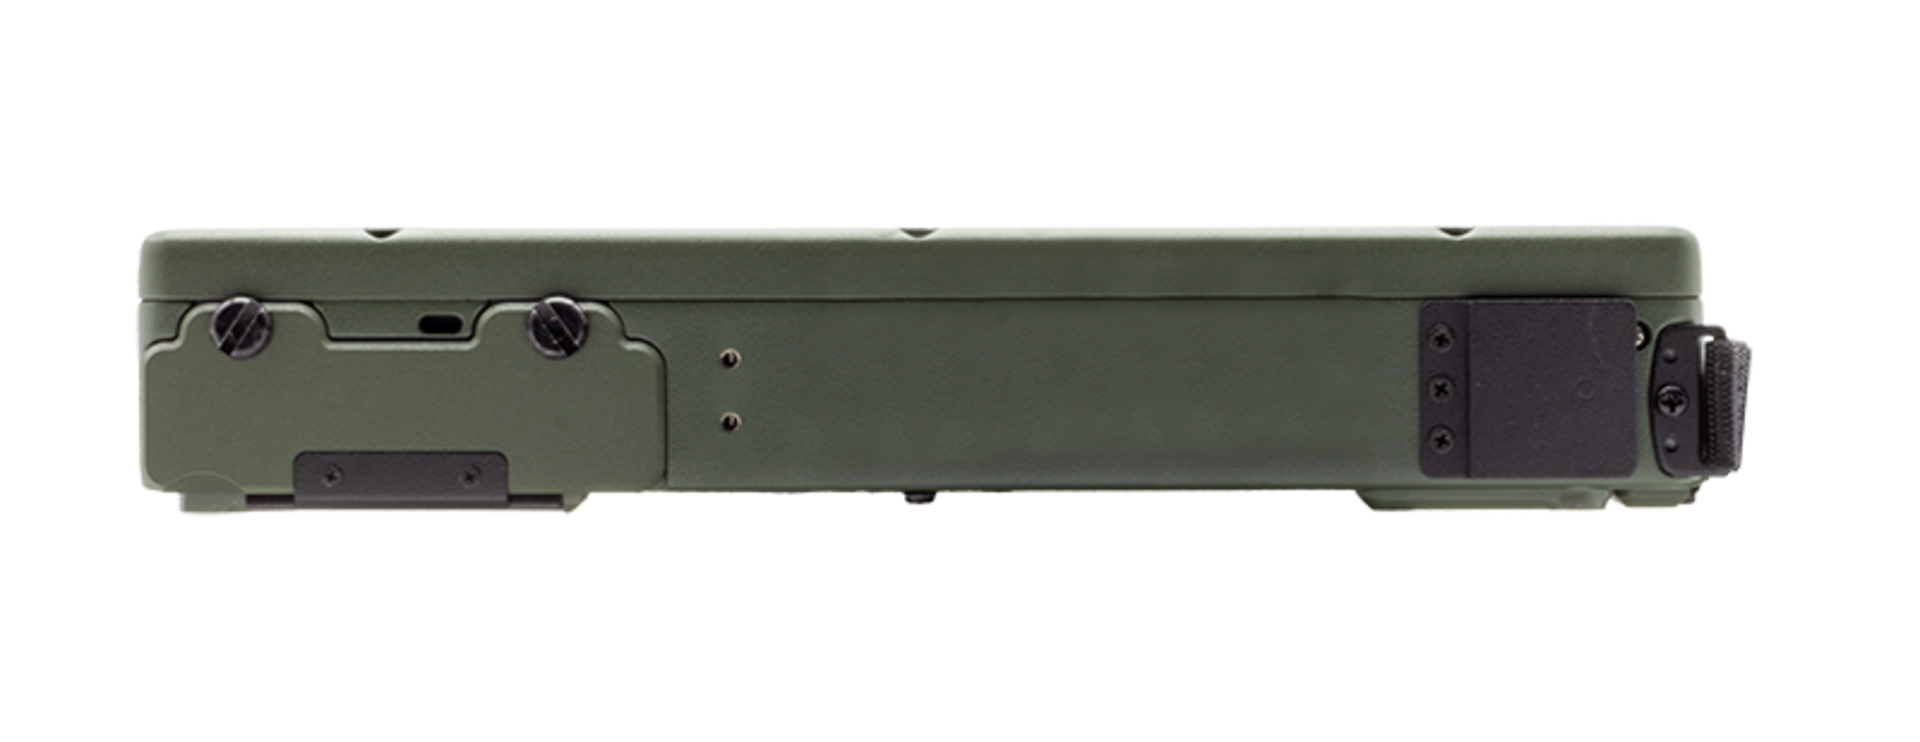 Panther DR13 top side